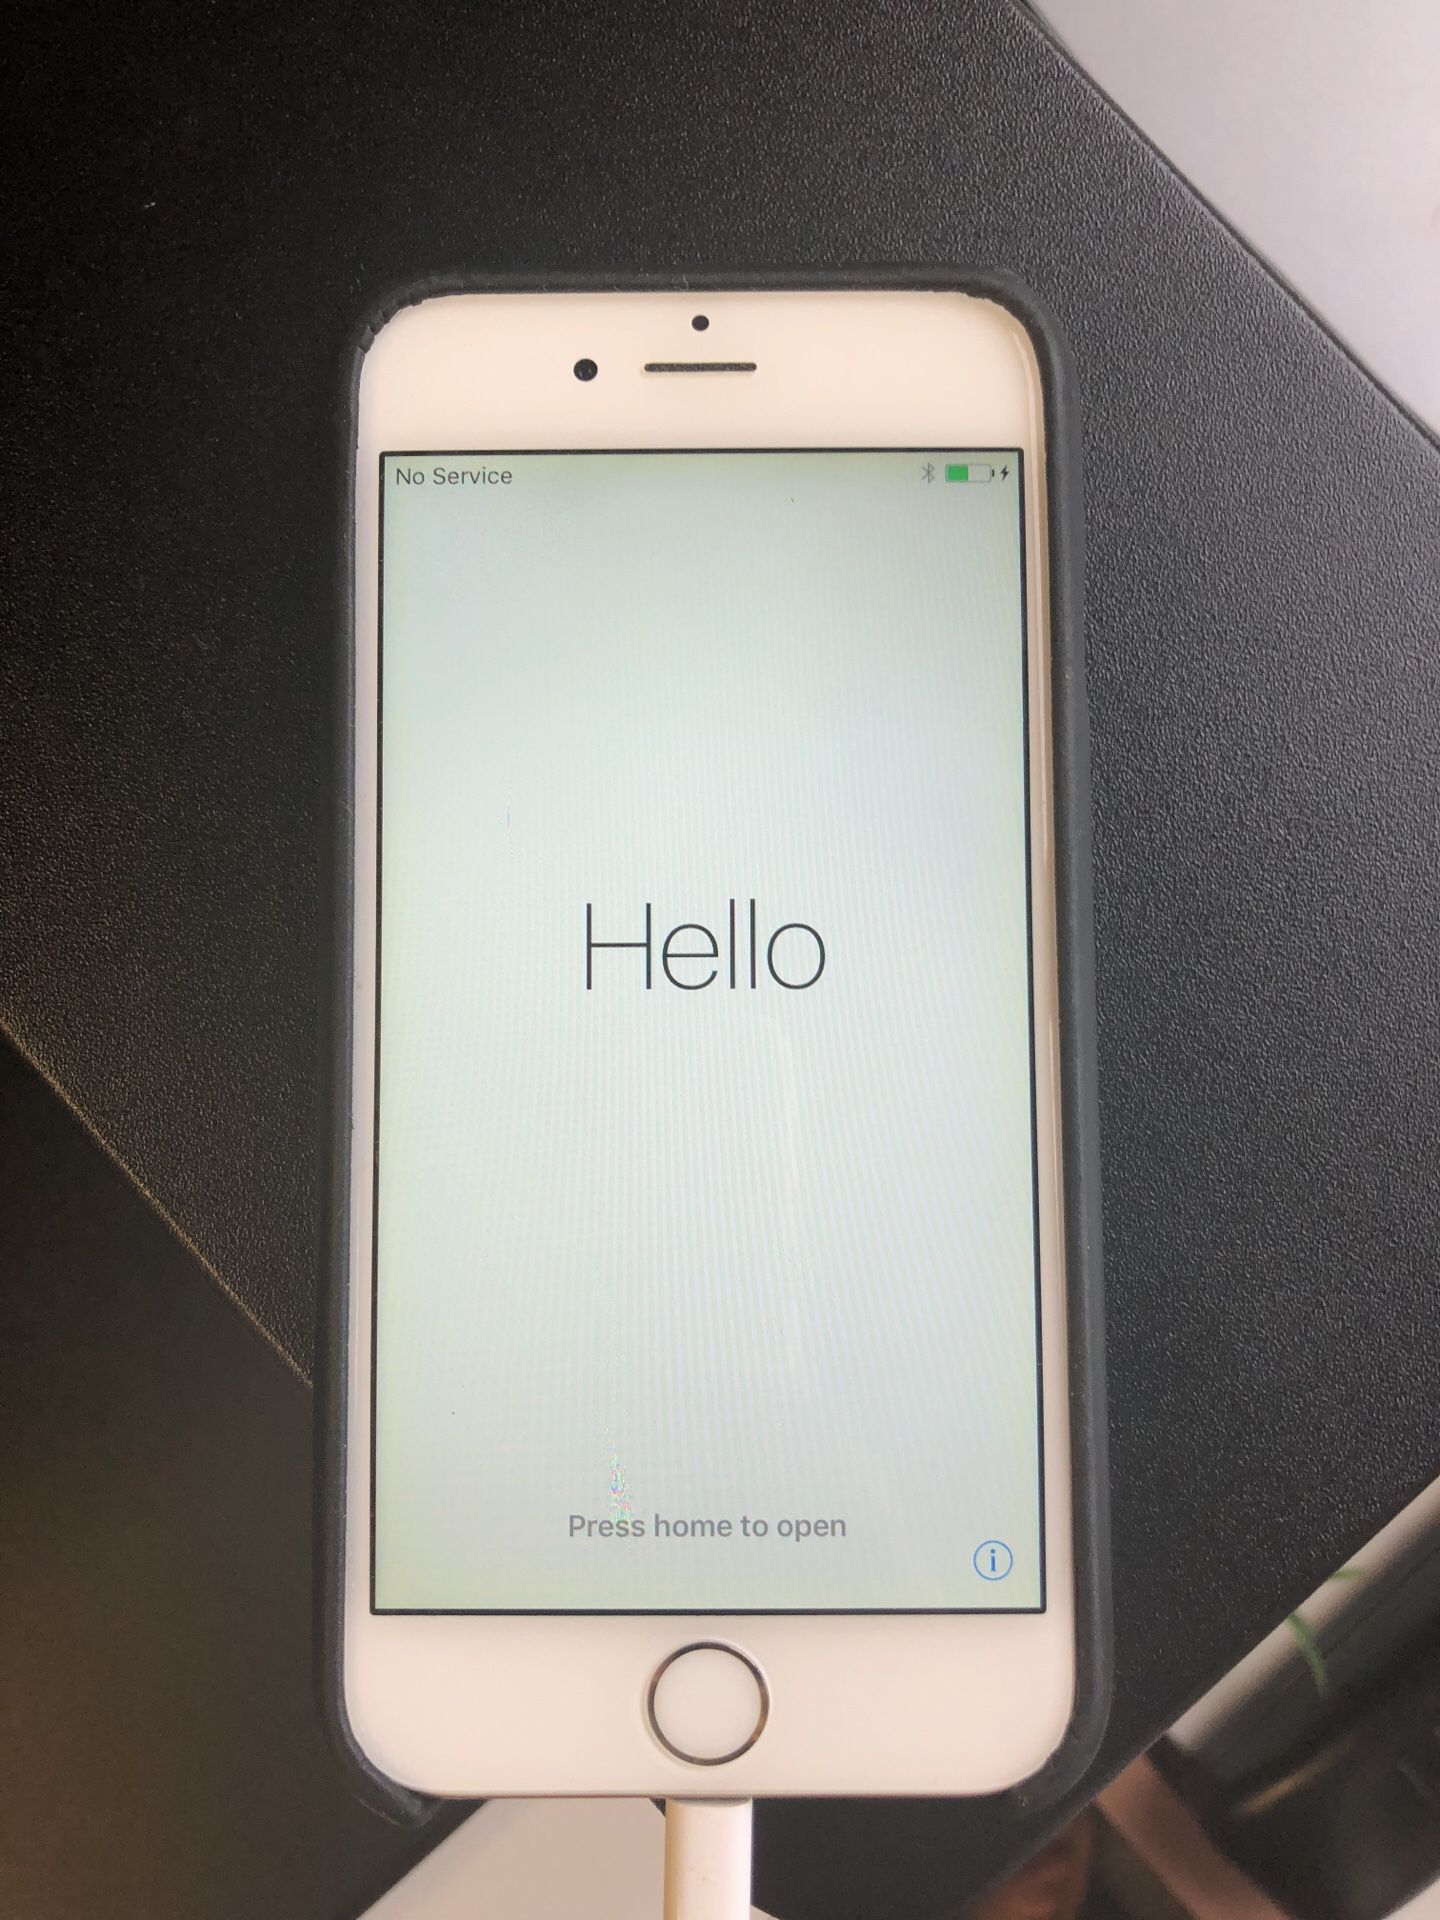 Apple iPhone 6 - unlocked and reset to factory settings. Rose gold color. Works perfectly and still has like new battery life!